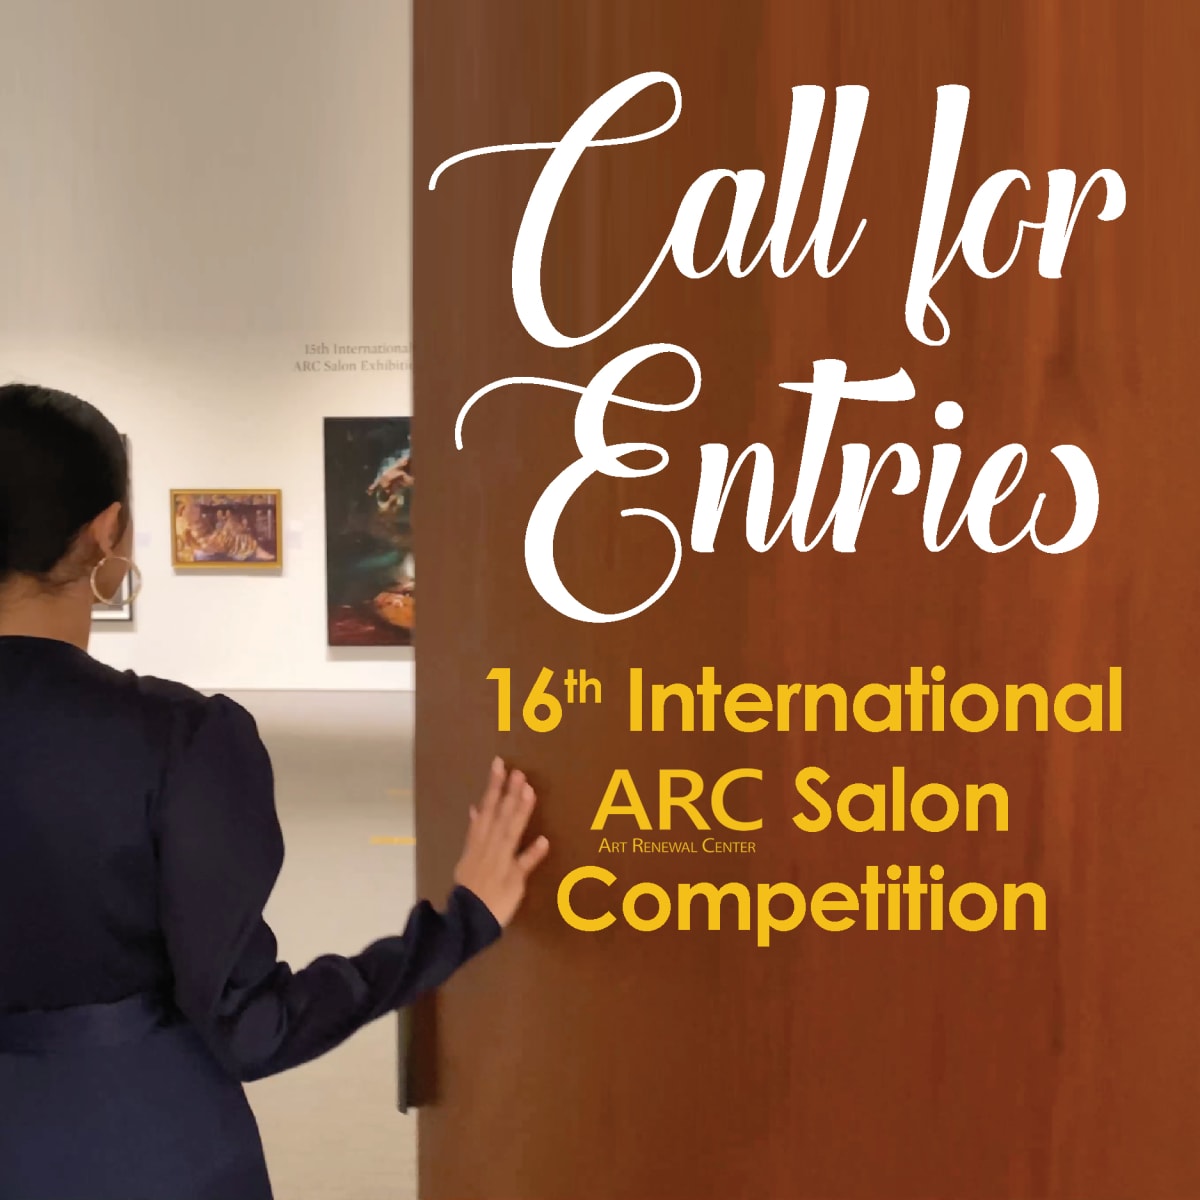 Call for Entry 16th International ARC Salon Competition Artwork Archive